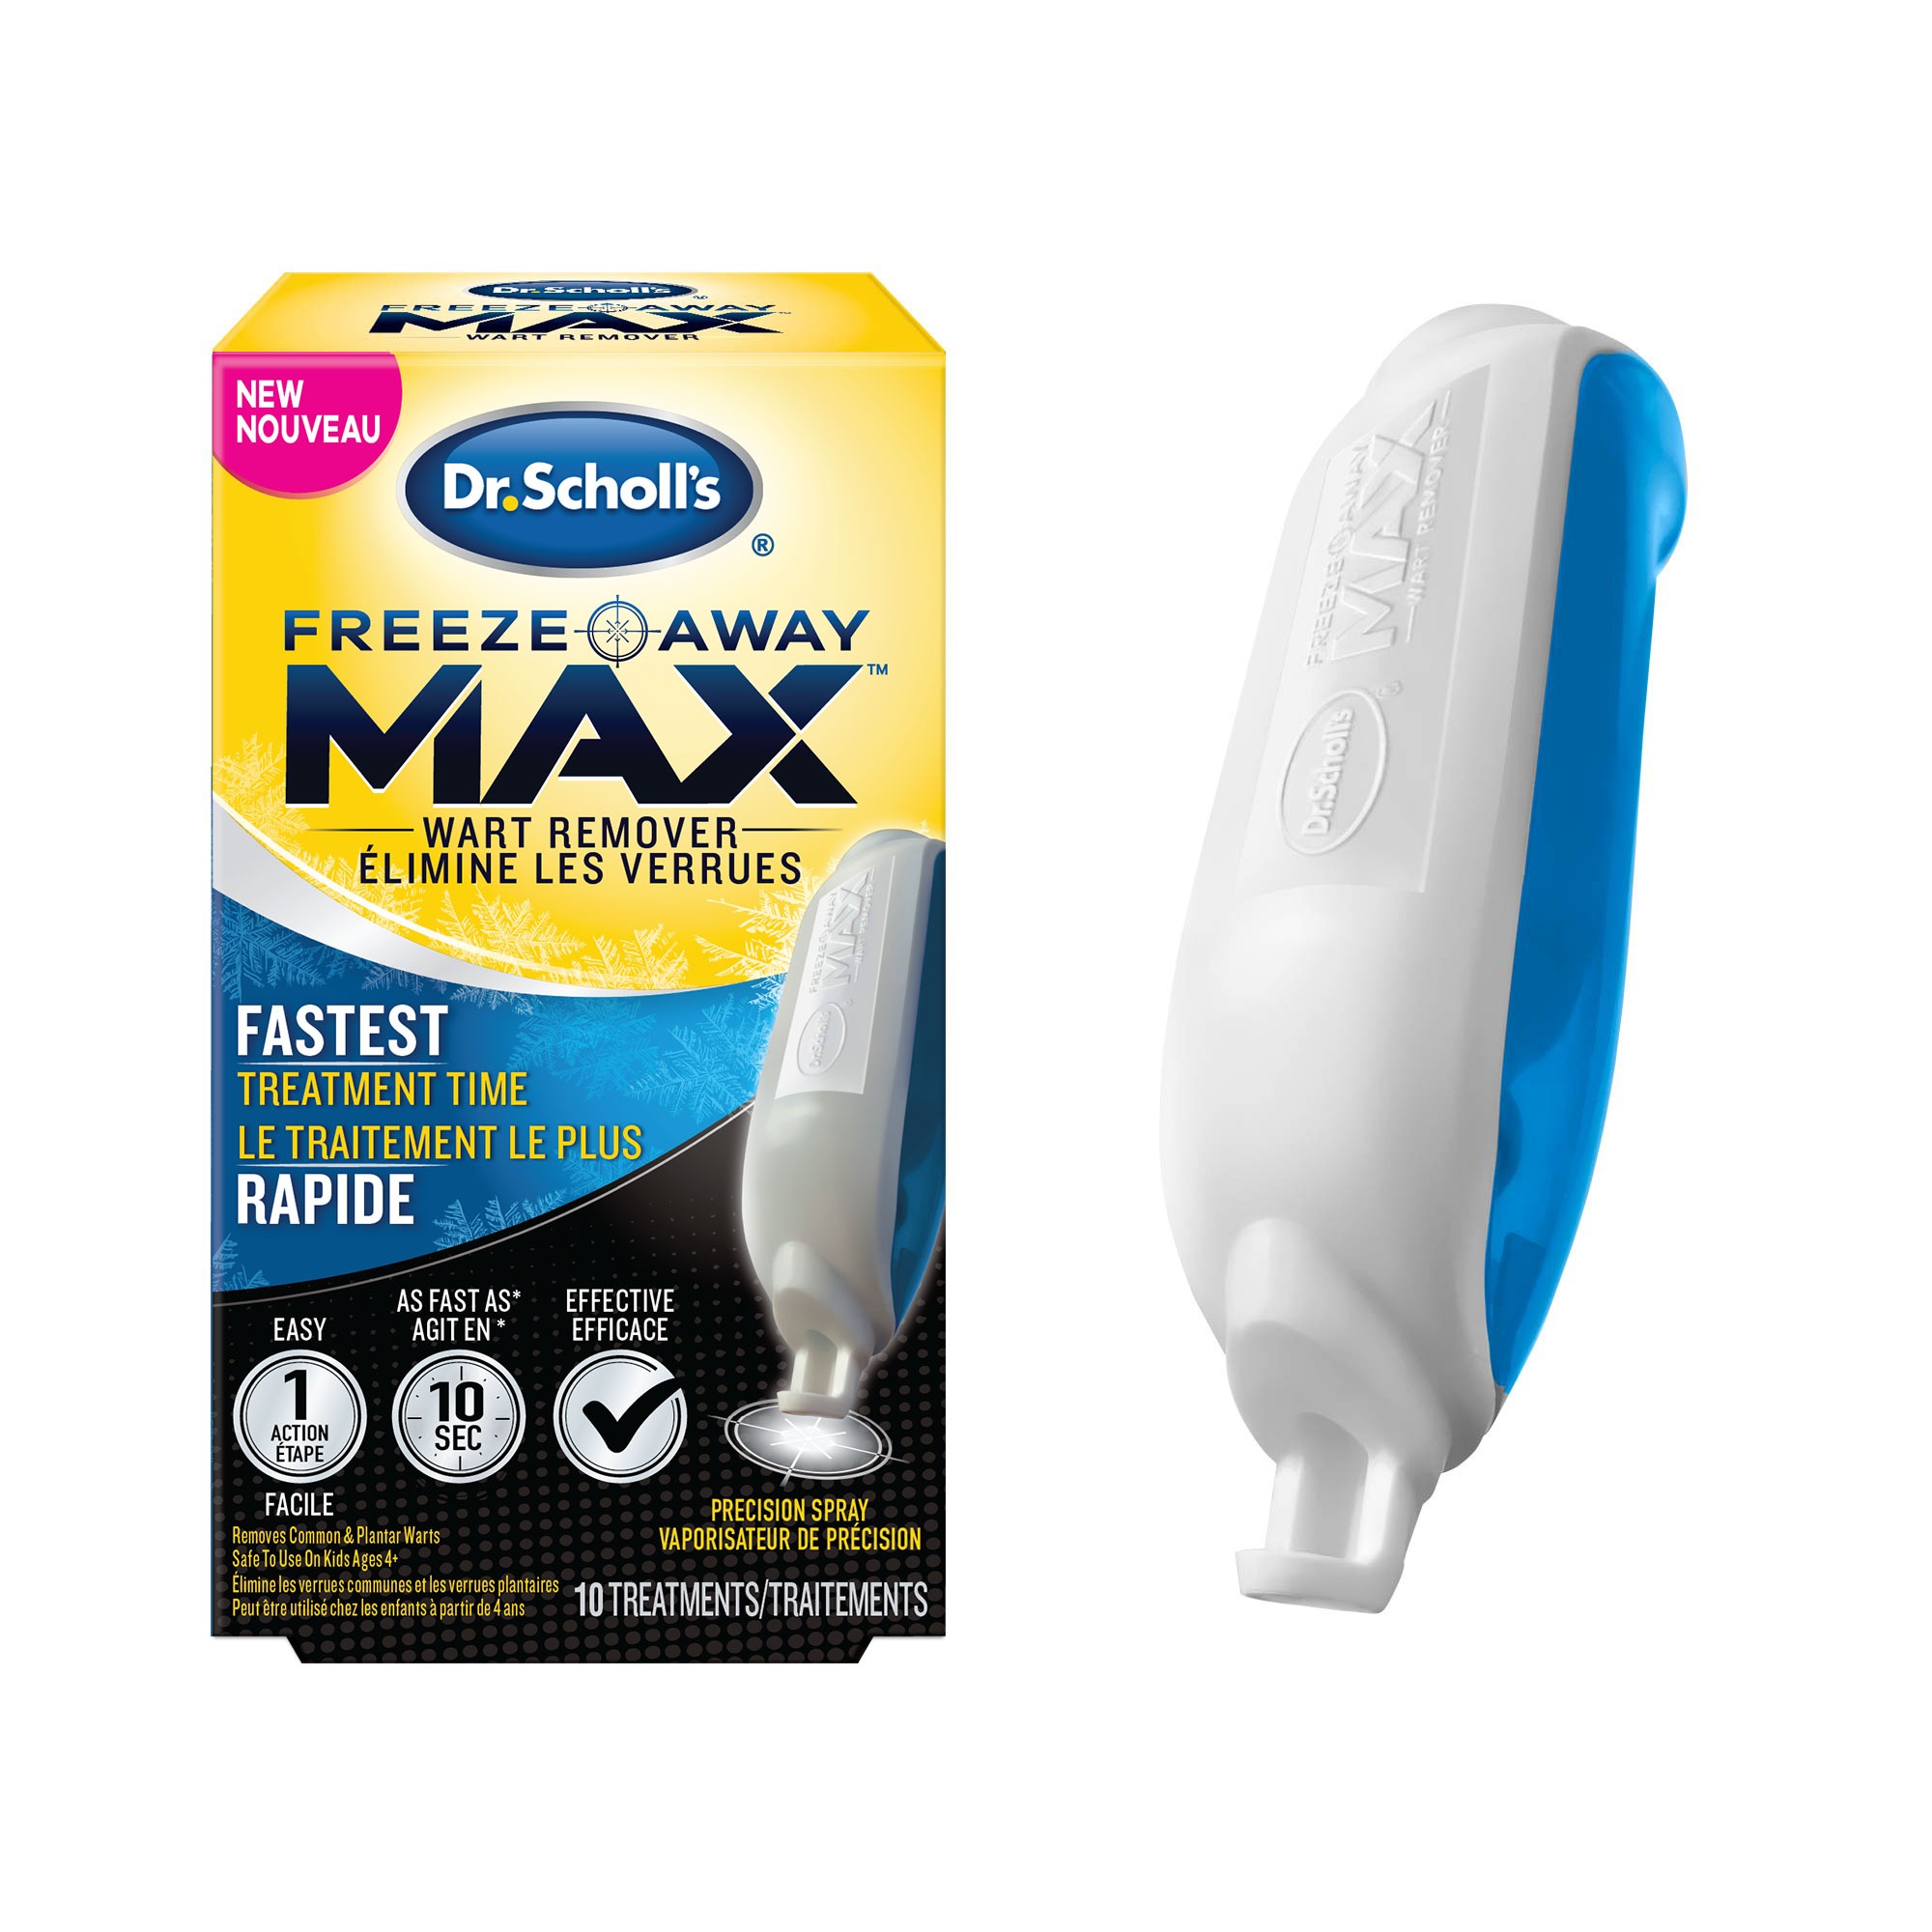 Dr. Scholl's Freeze Away Max™ Wart Remover